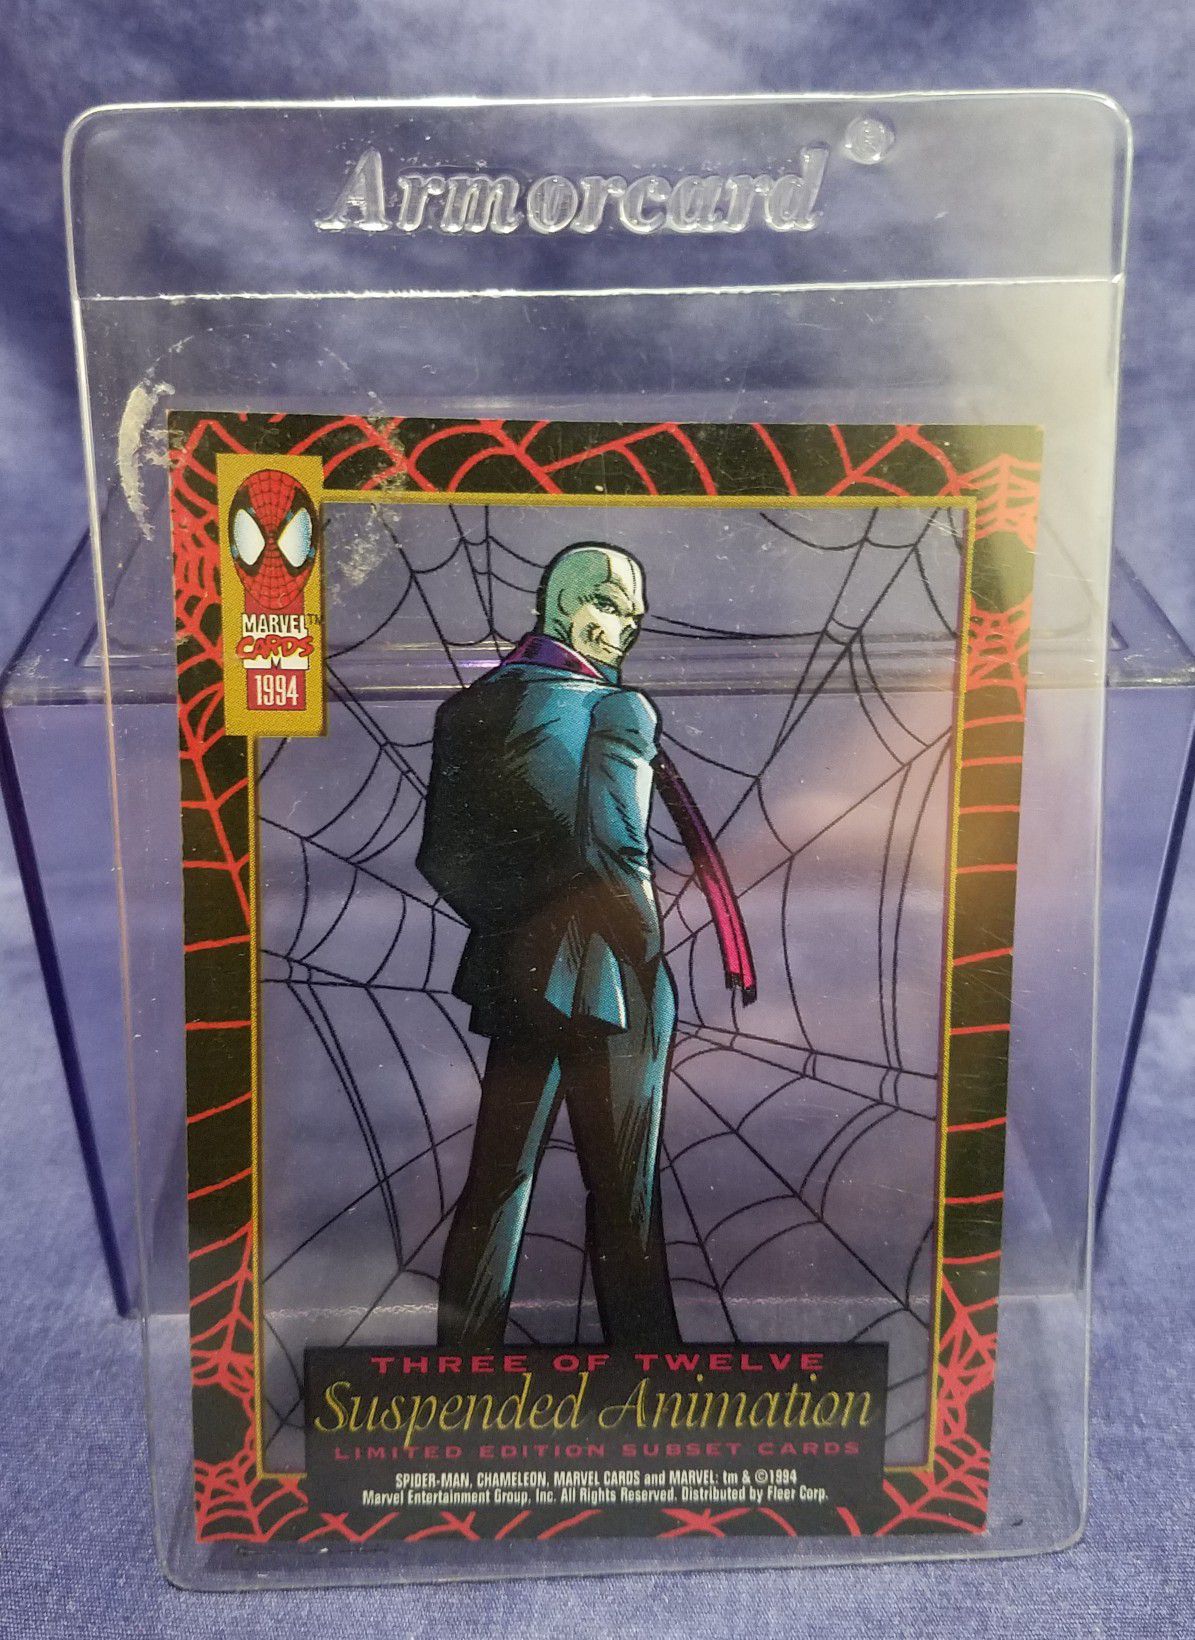 1994 Fleer Marvel Cards The Amazing Spider-Man 1st Edition Limited Edition Suspended  Animation Plasticard #3 Chameleon for Sale in Pomona, CA - OfferUp